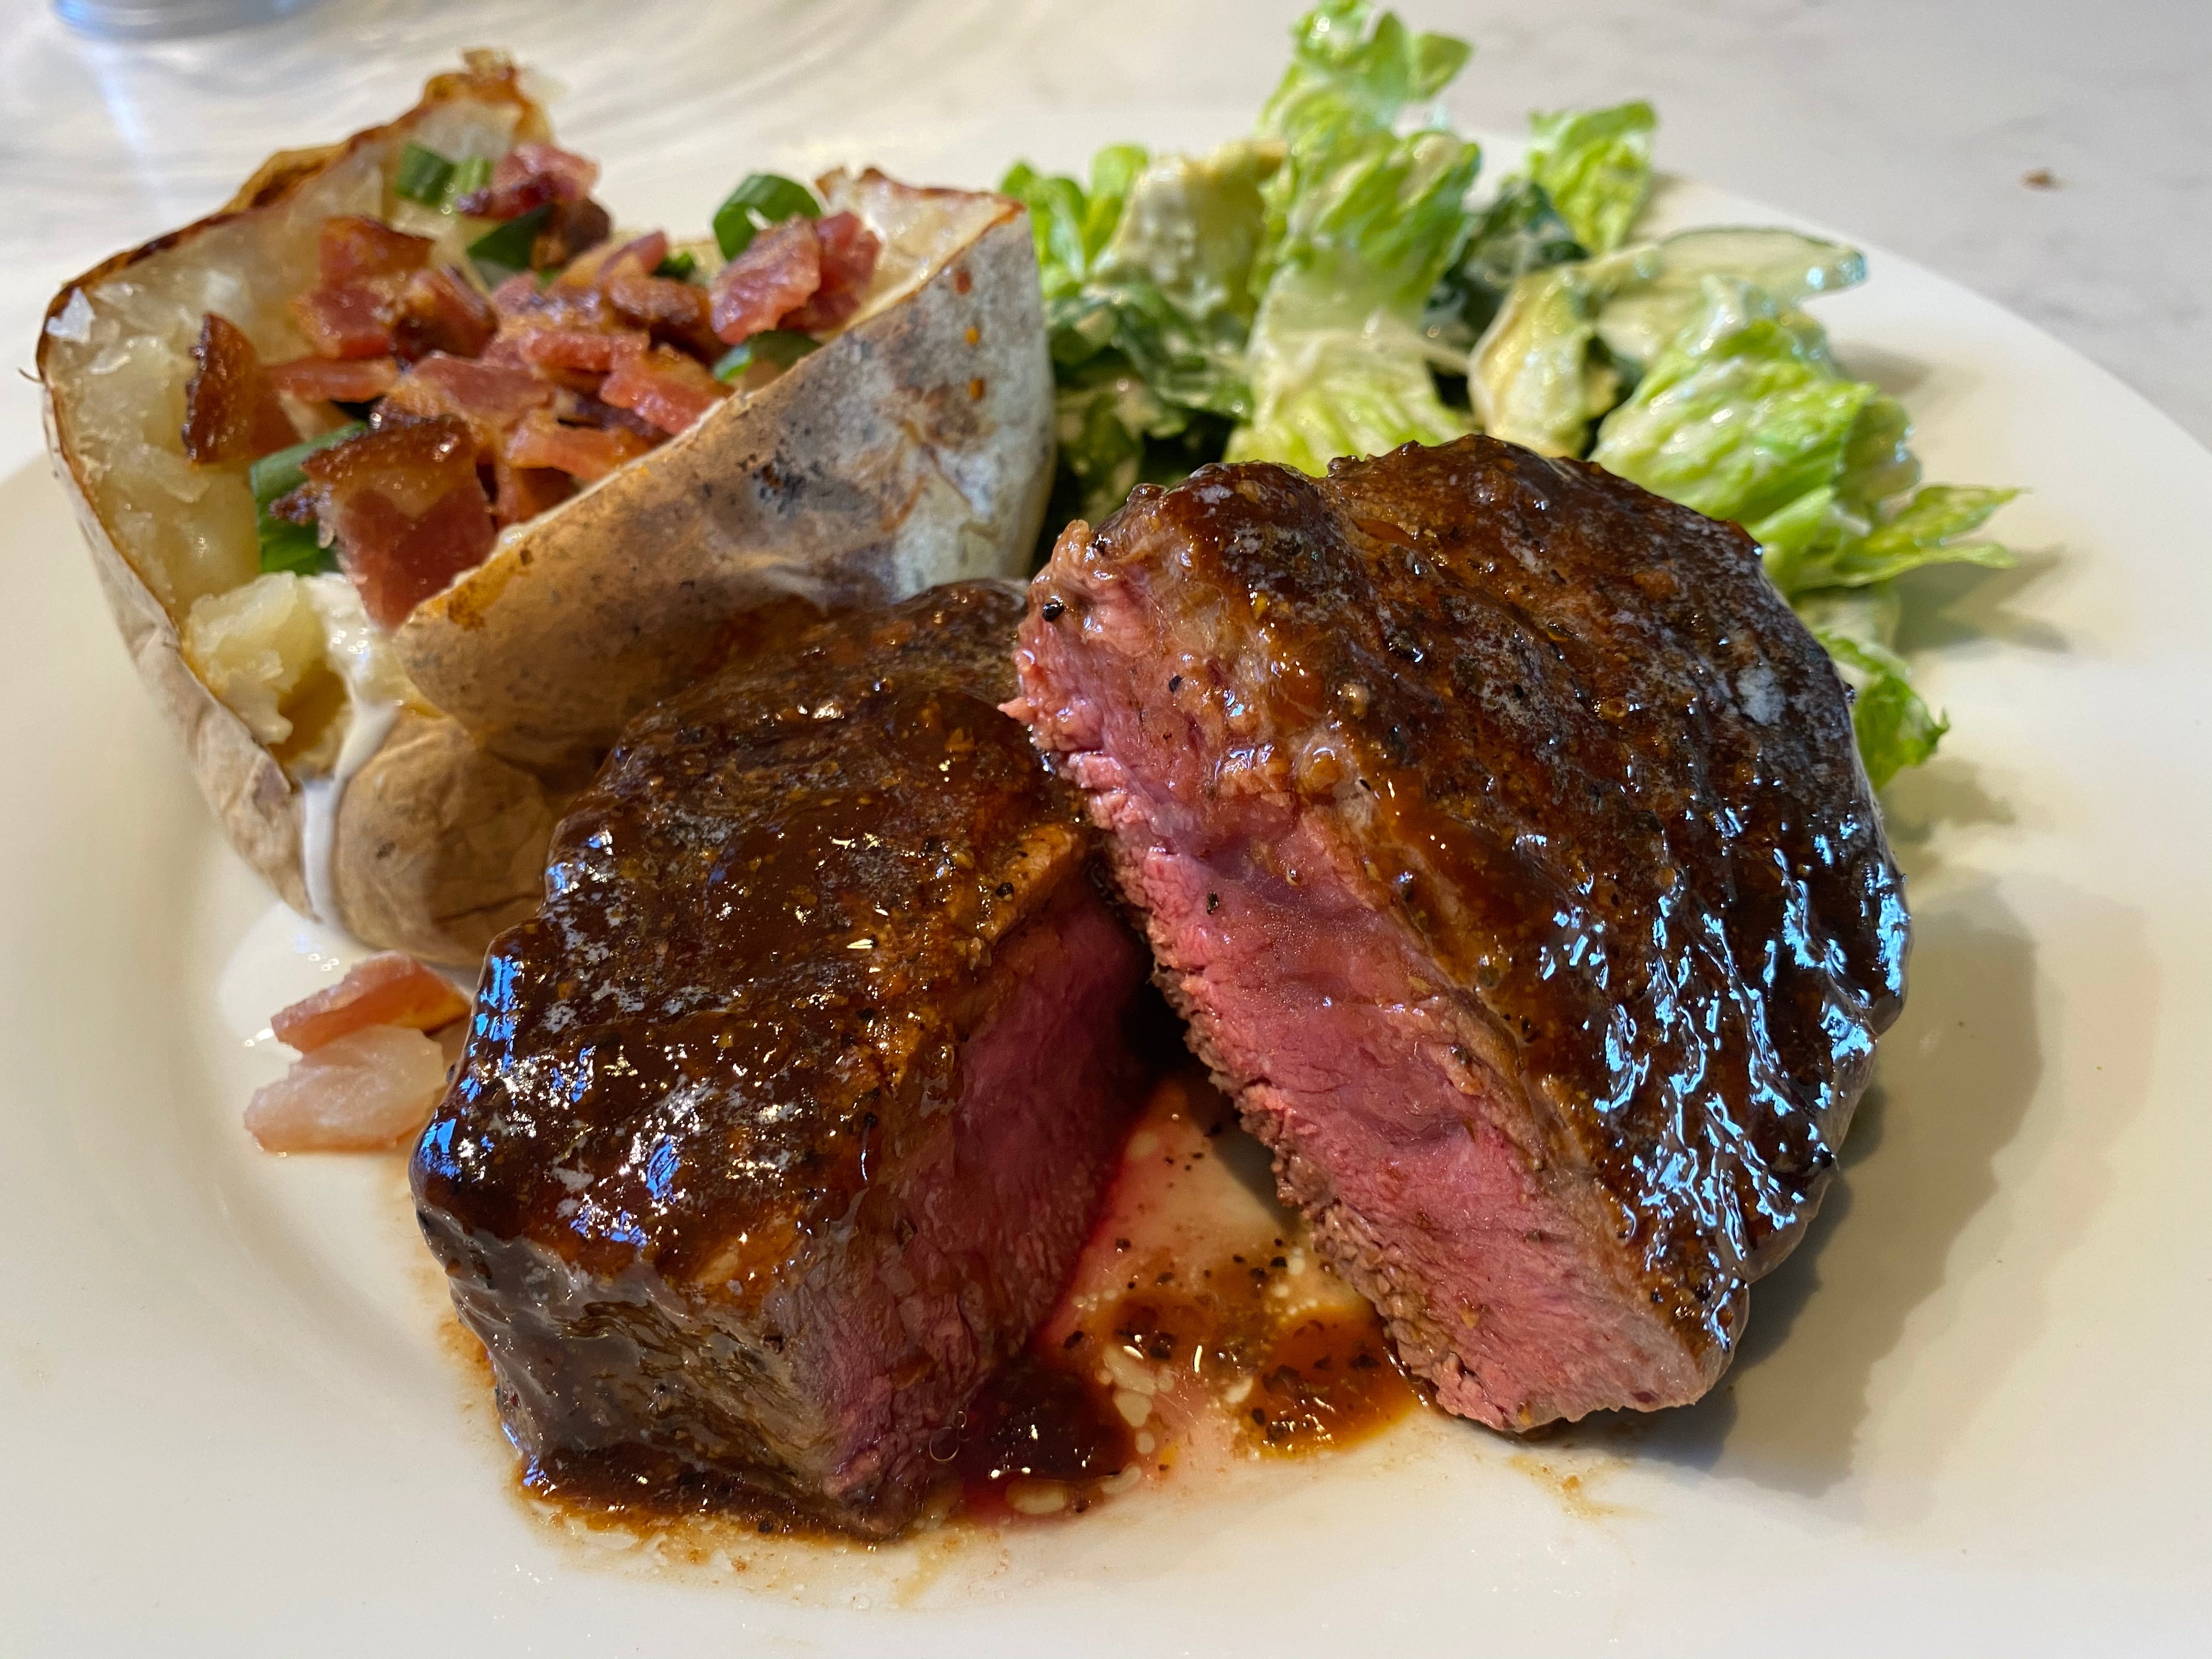 A succulent medium-rare steak, grilled to perfection with a glossy, caramelized exterior, served on a white plate alongside a baked potato topped with bacon bits and green onions, and a side of green leaf salad.